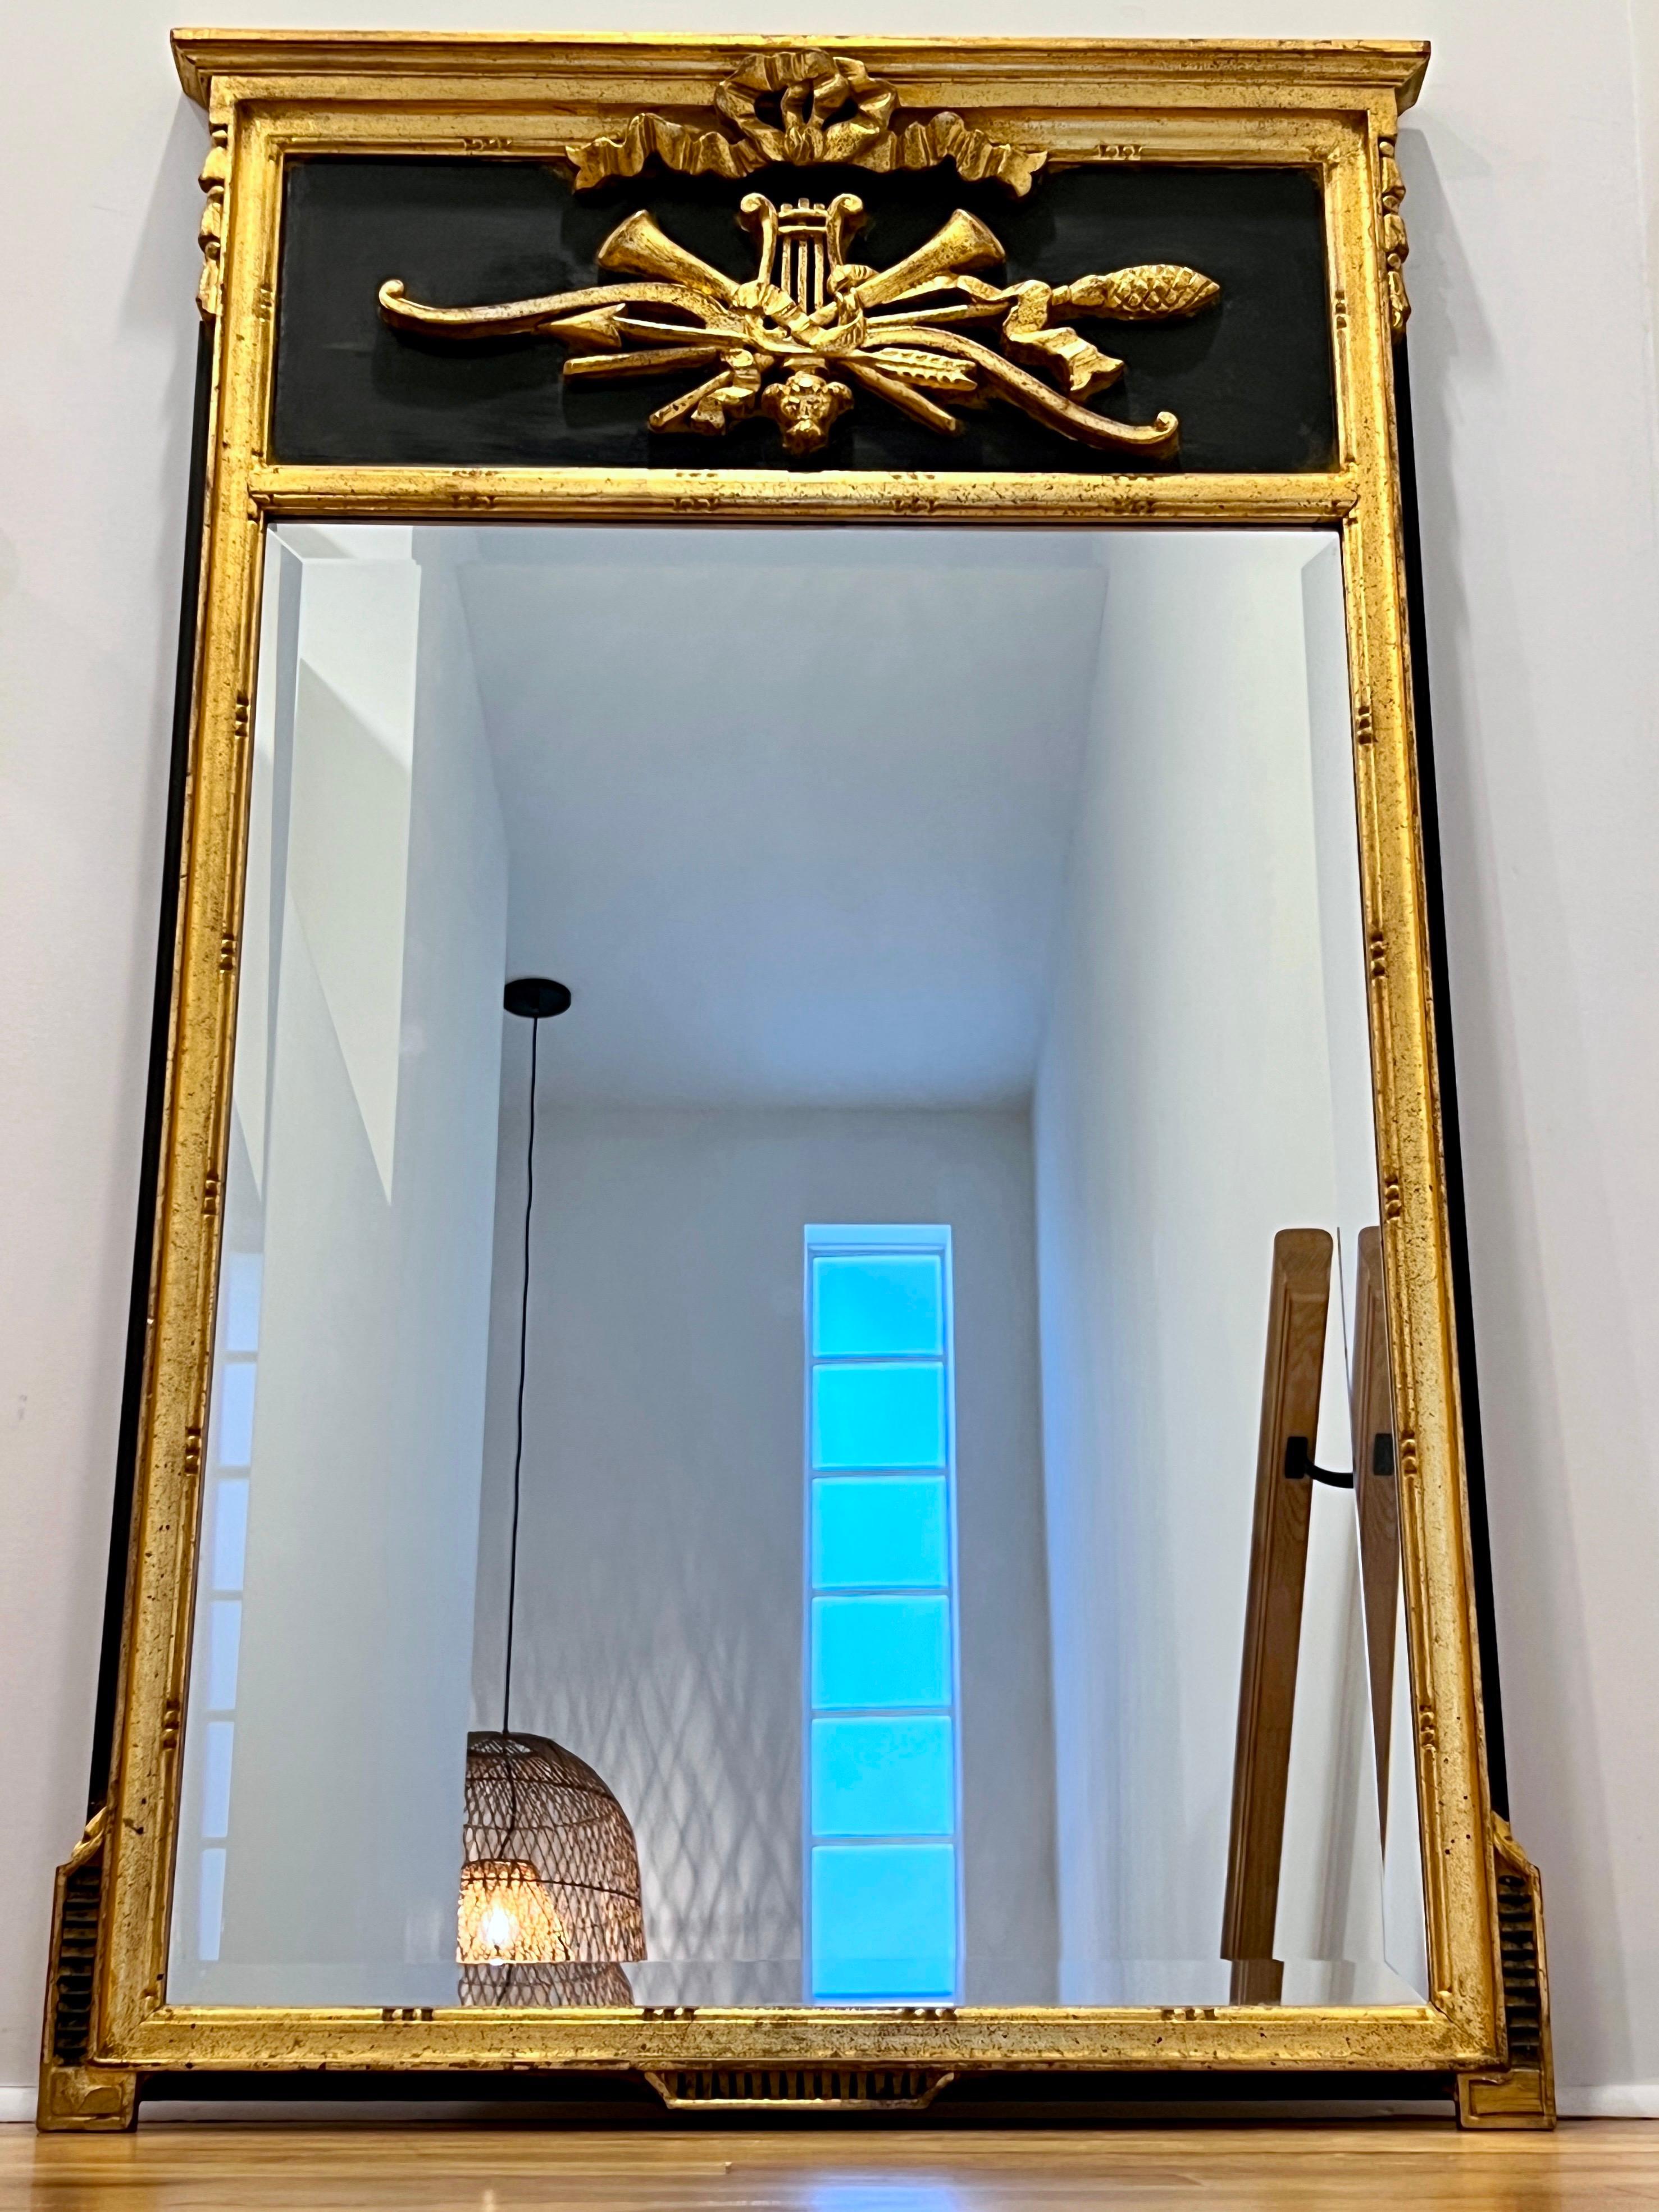 Neoclassical trumeau mirror imported from Italy with hand-carved giltwood frame. The Louis XVI style mirror has a black hand-painted pediment top with ornate motifs in gold leaf gesso. The symbolic motifs feature a lyre, trumpets, bow and arrow,